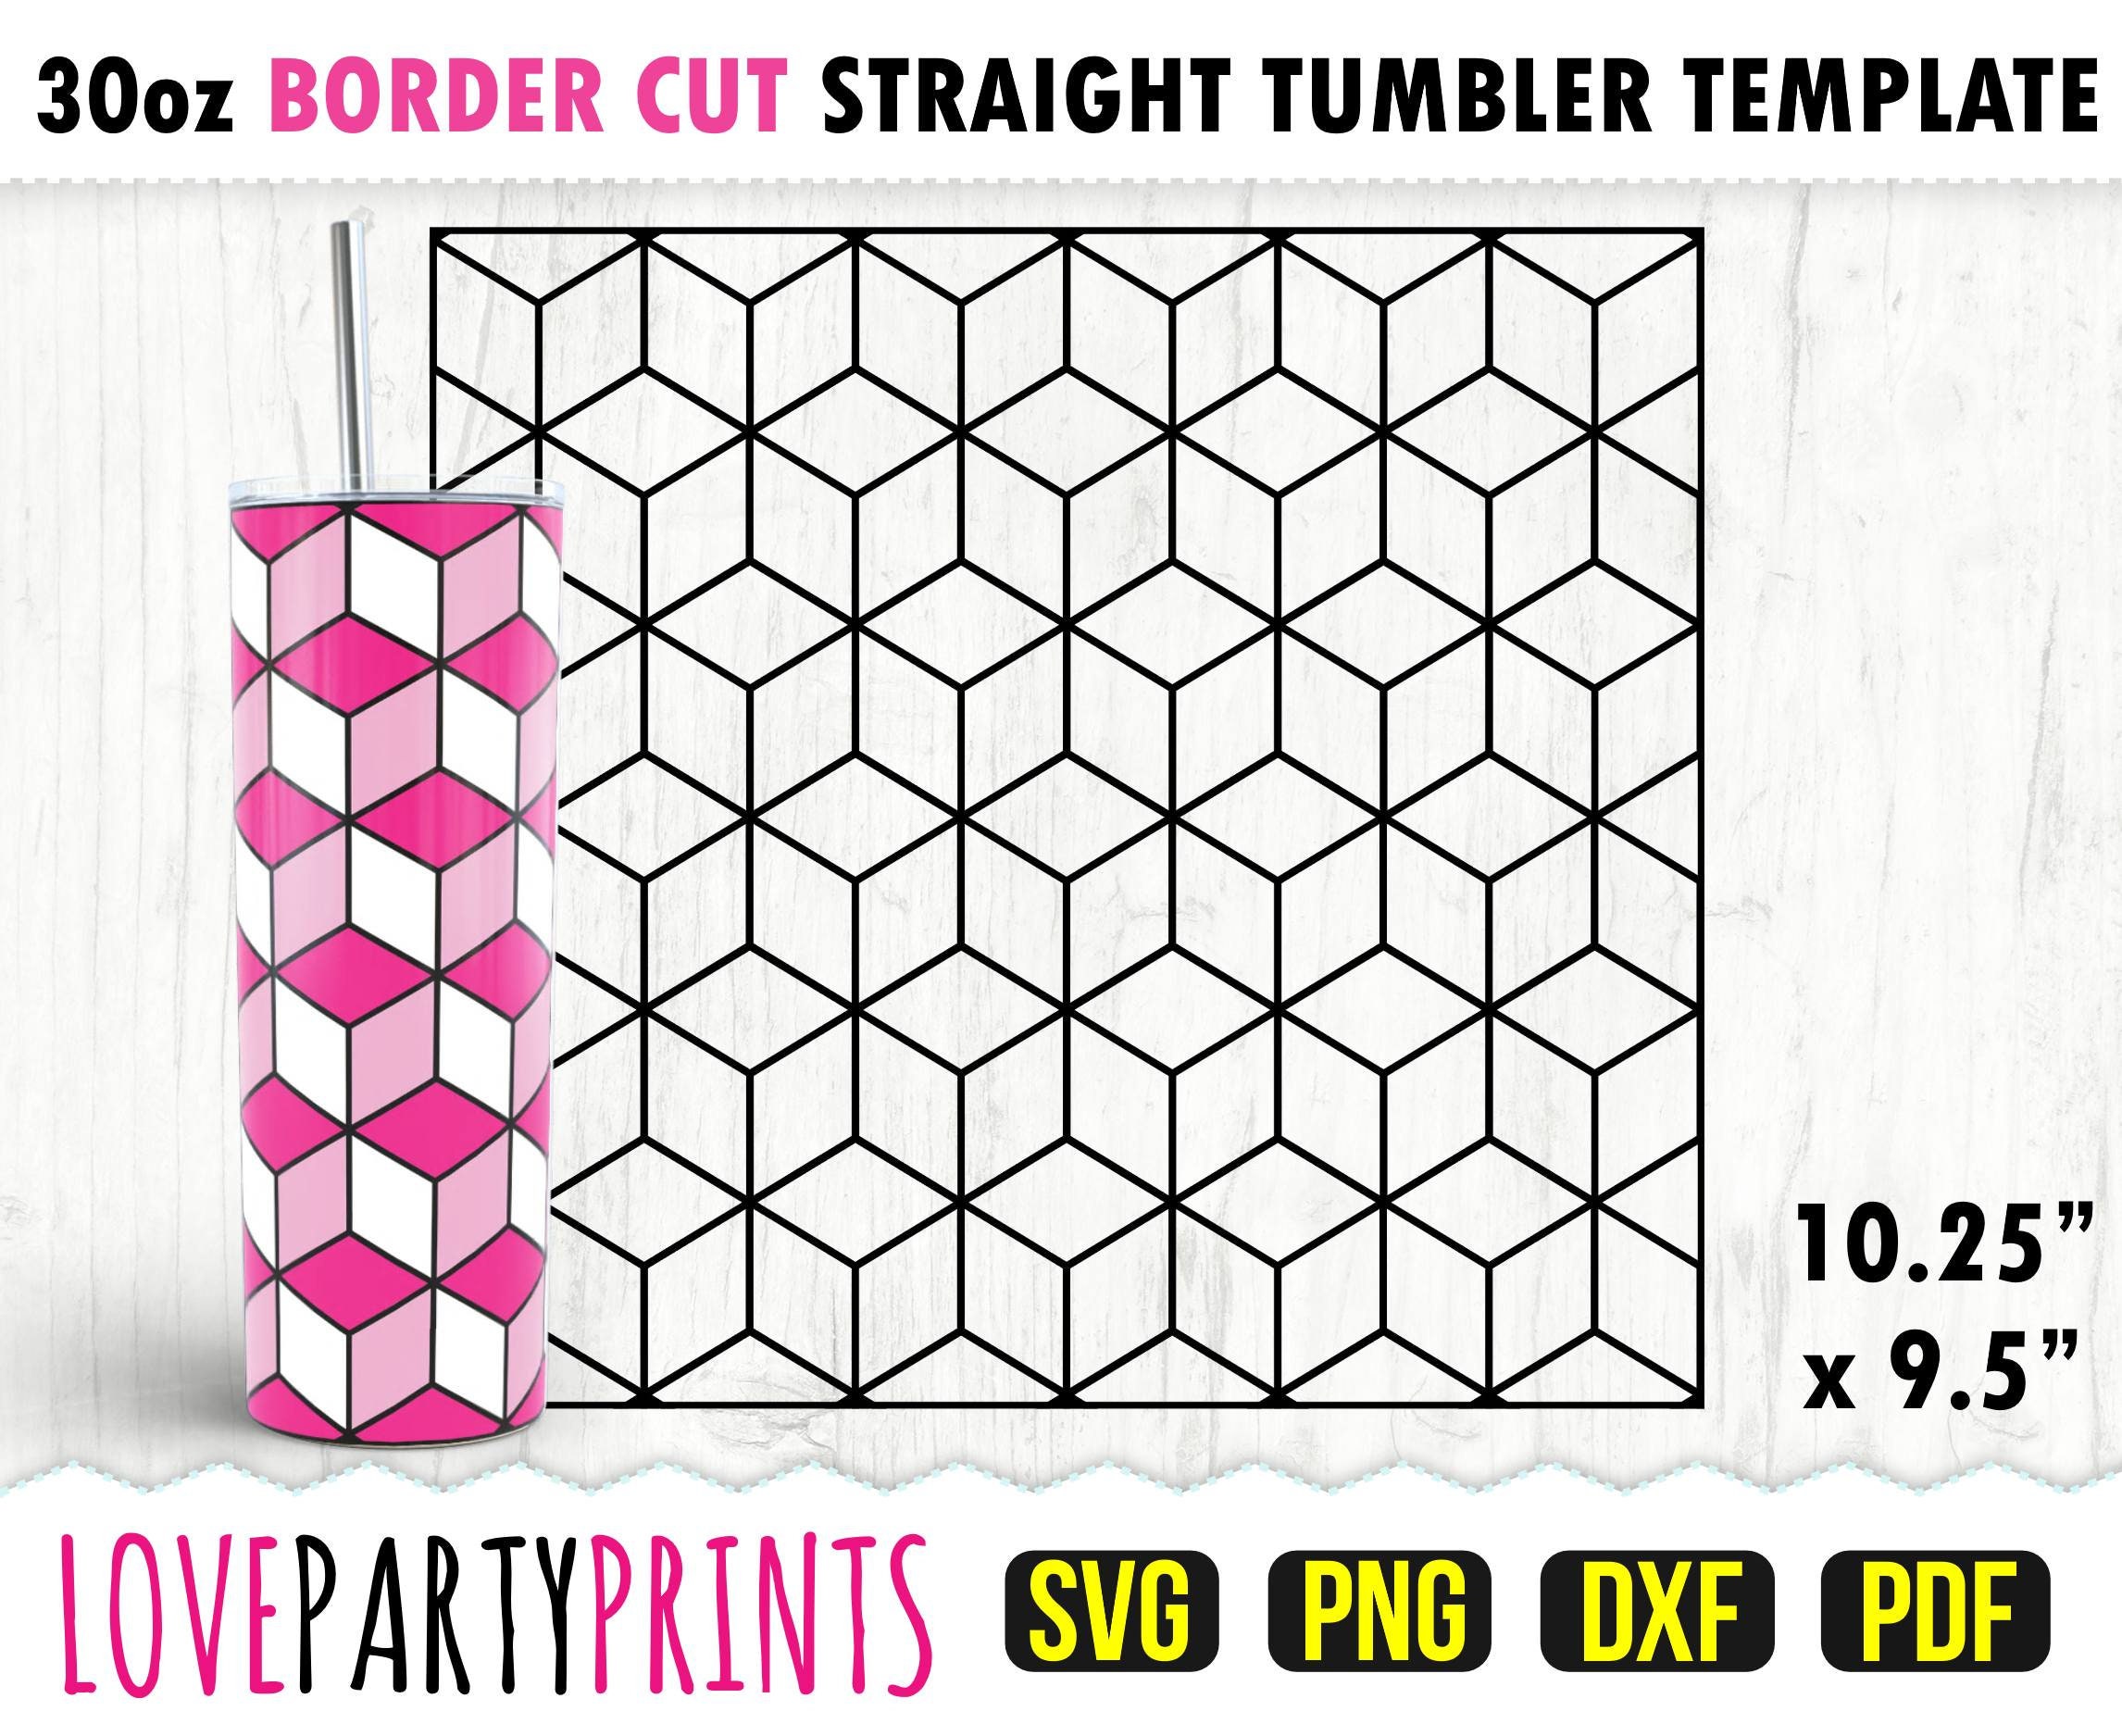 Big Floppa Cube Papercraft Template. DIY Lowpoly Toy. 3D 